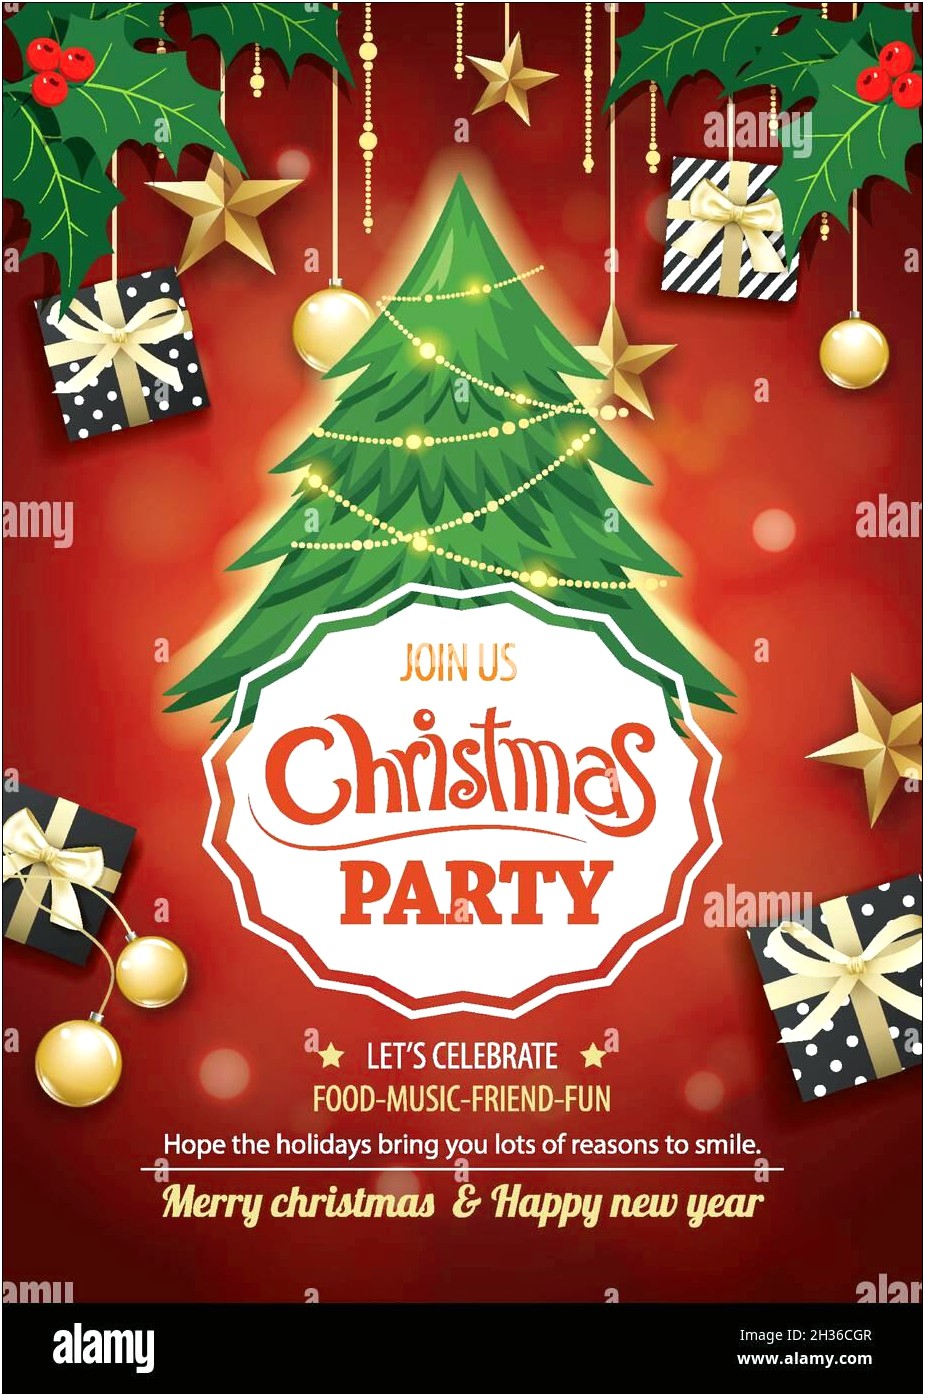 Free Holiday Party Invitation Background Template